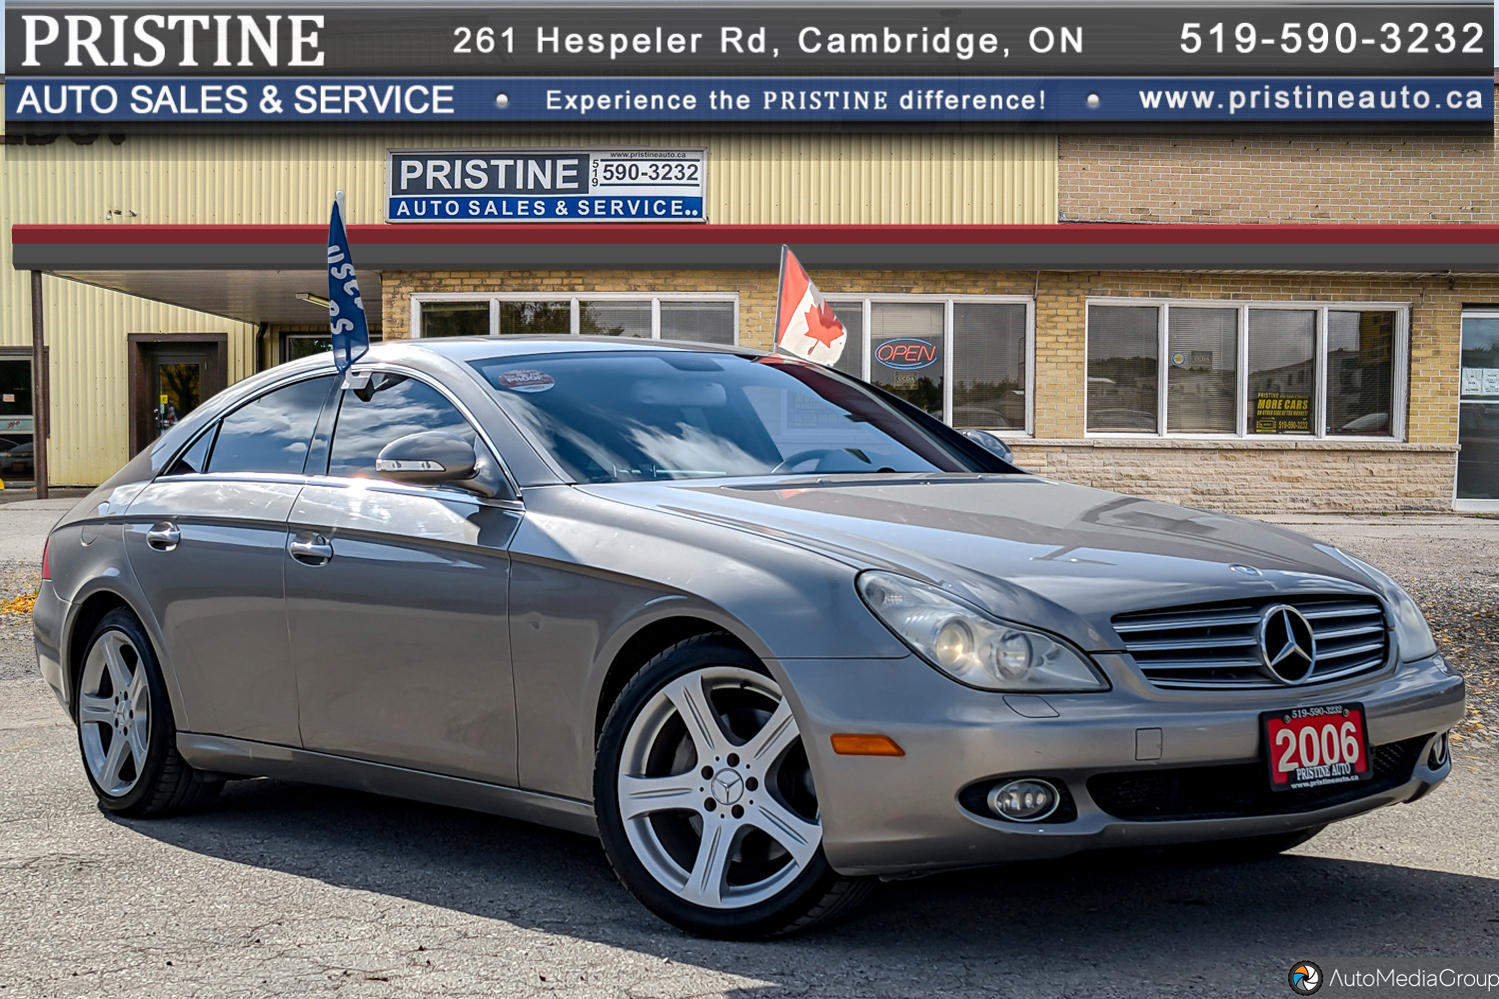 2006 Mercedes-Benz CLS-Class CLS 500 Only 169 km Navi. Leather Sunroof 1 Owner